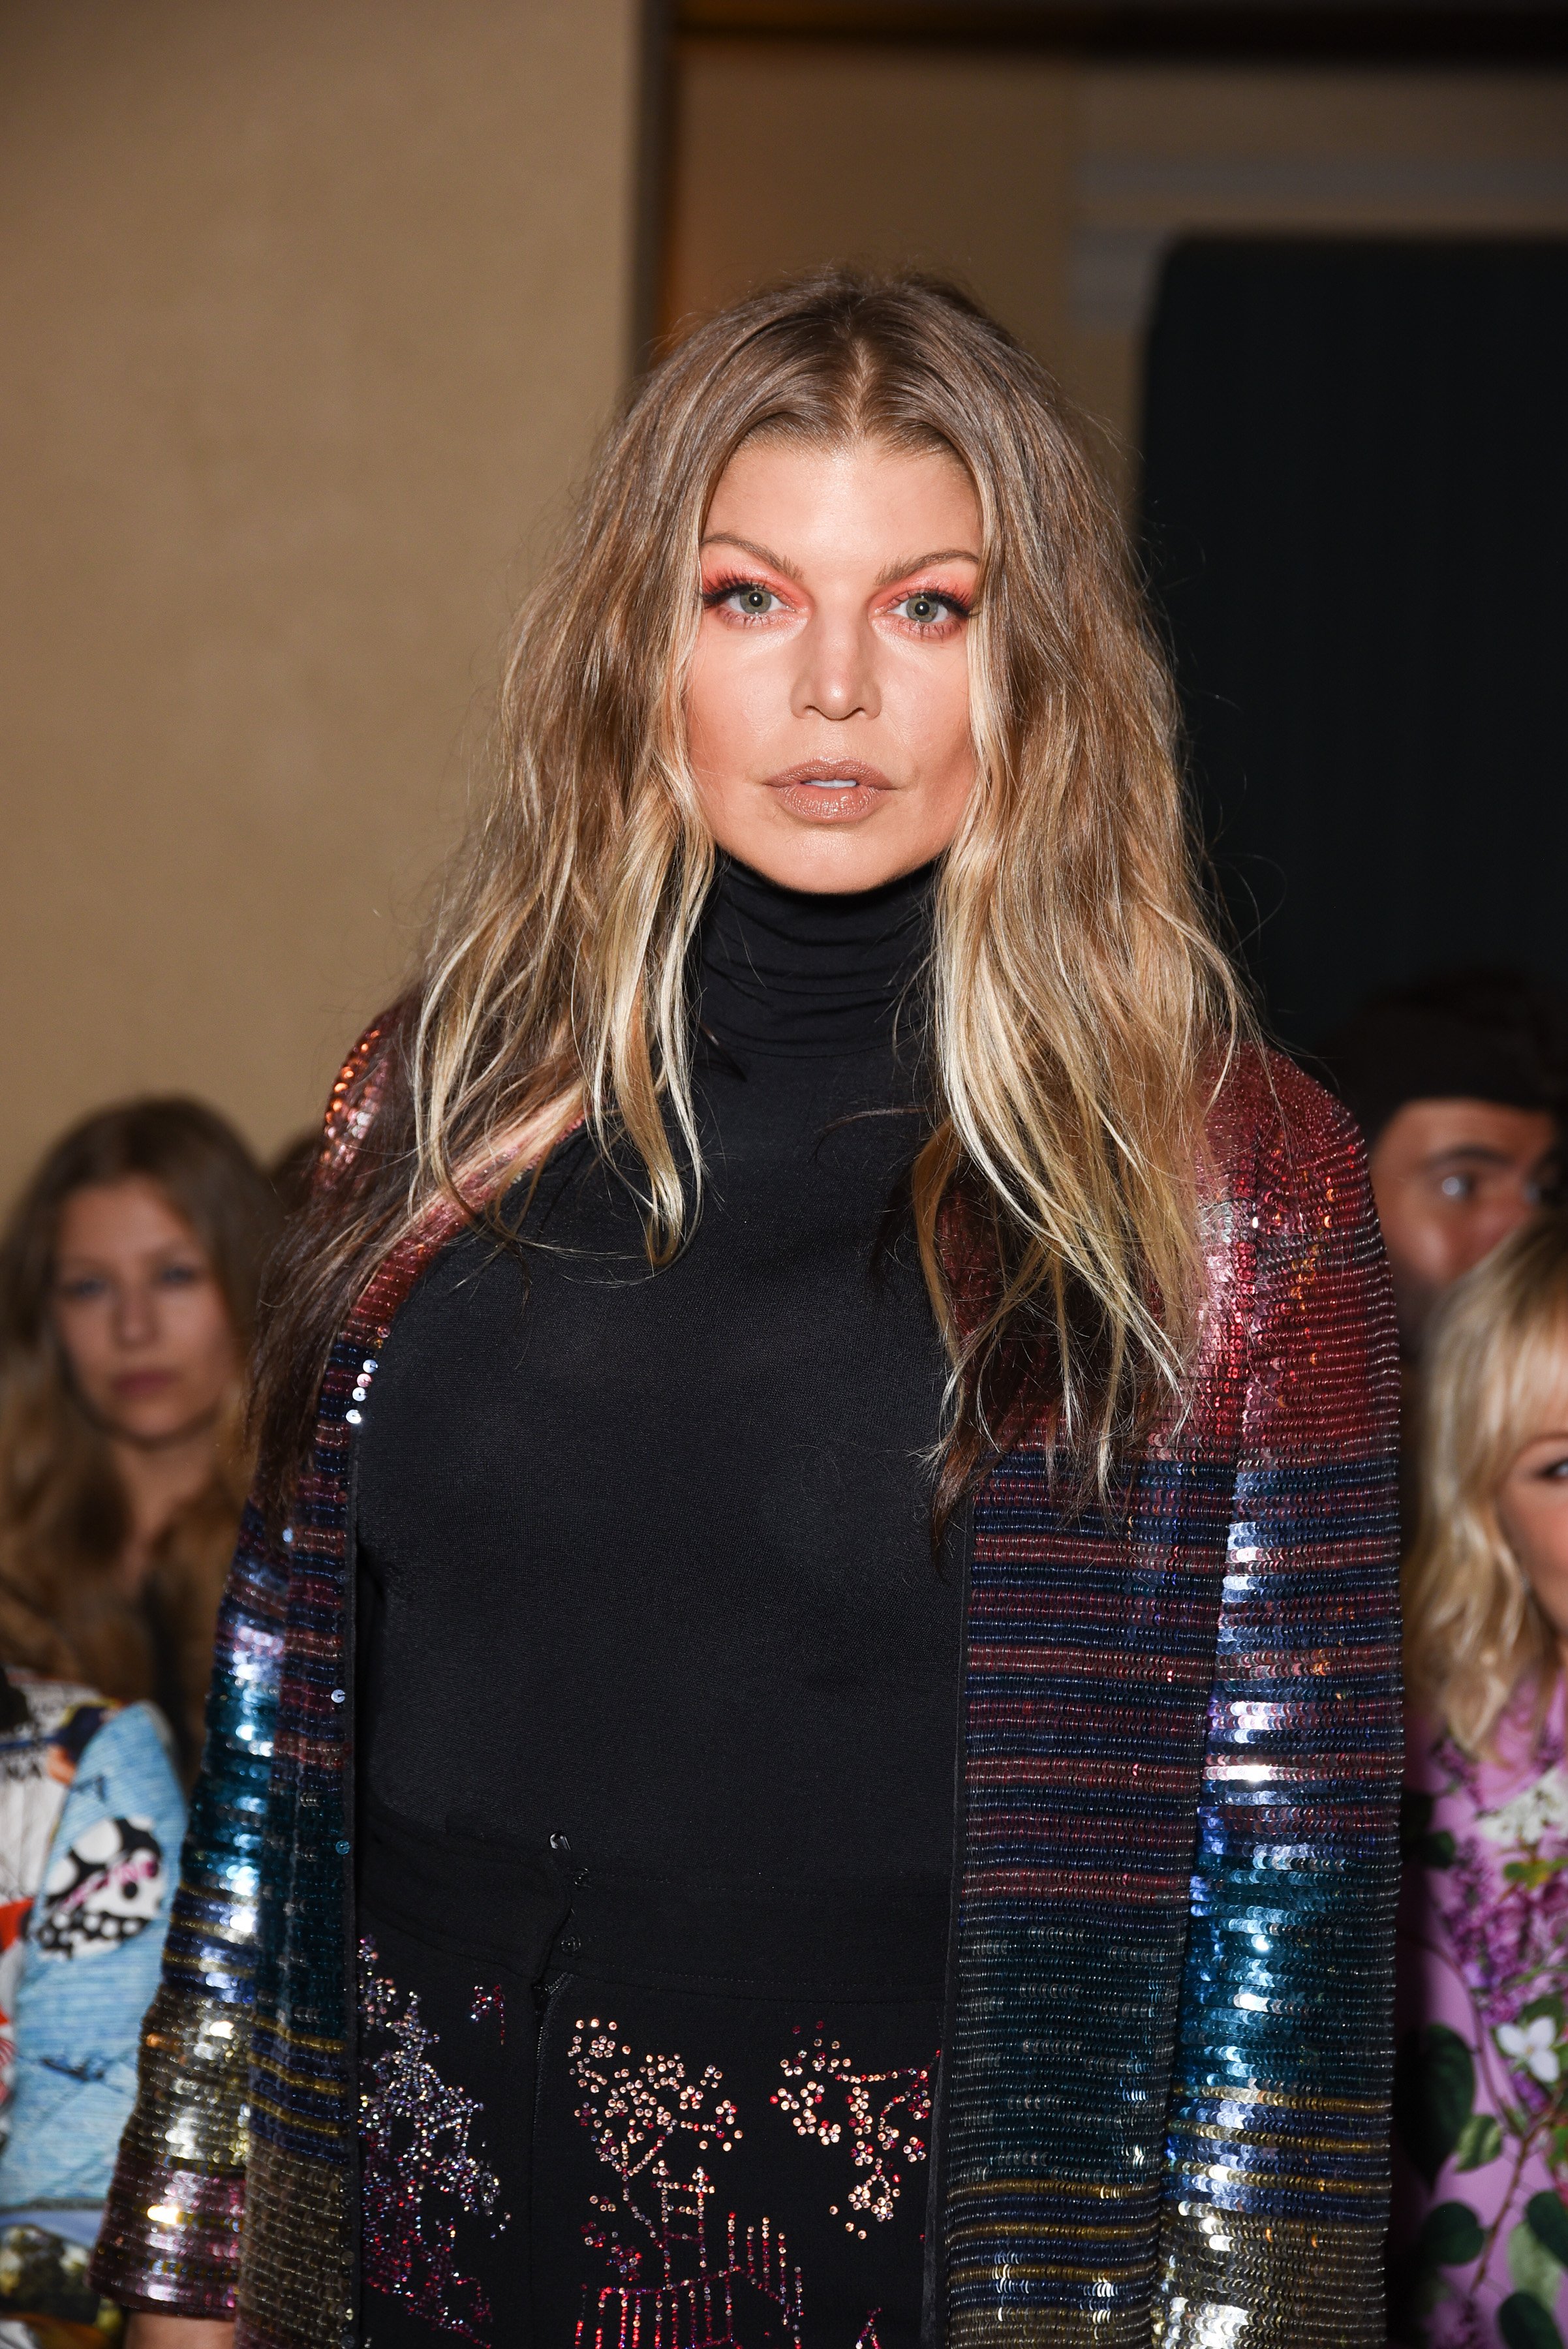 Fergie attends the Libertine Fall 2019 Runway Show at Ebell of Los Angeles on April 26, 2019 in Los Angeles, California | Photo: Getty Images